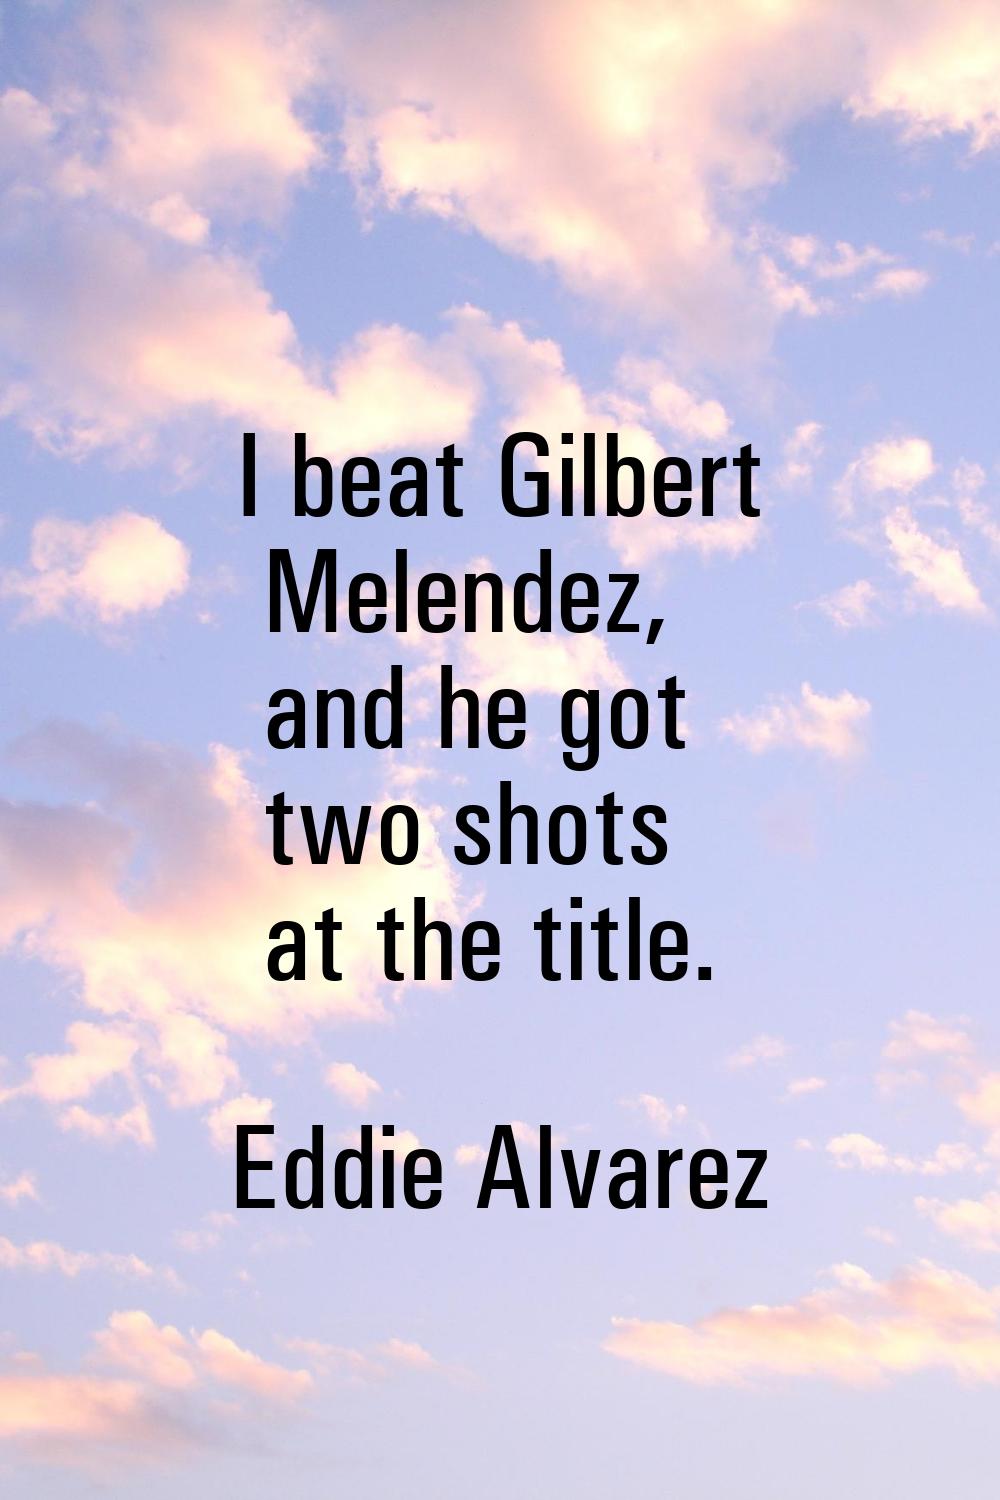 I beat Gilbert Melendez, and he got two shots at the title.